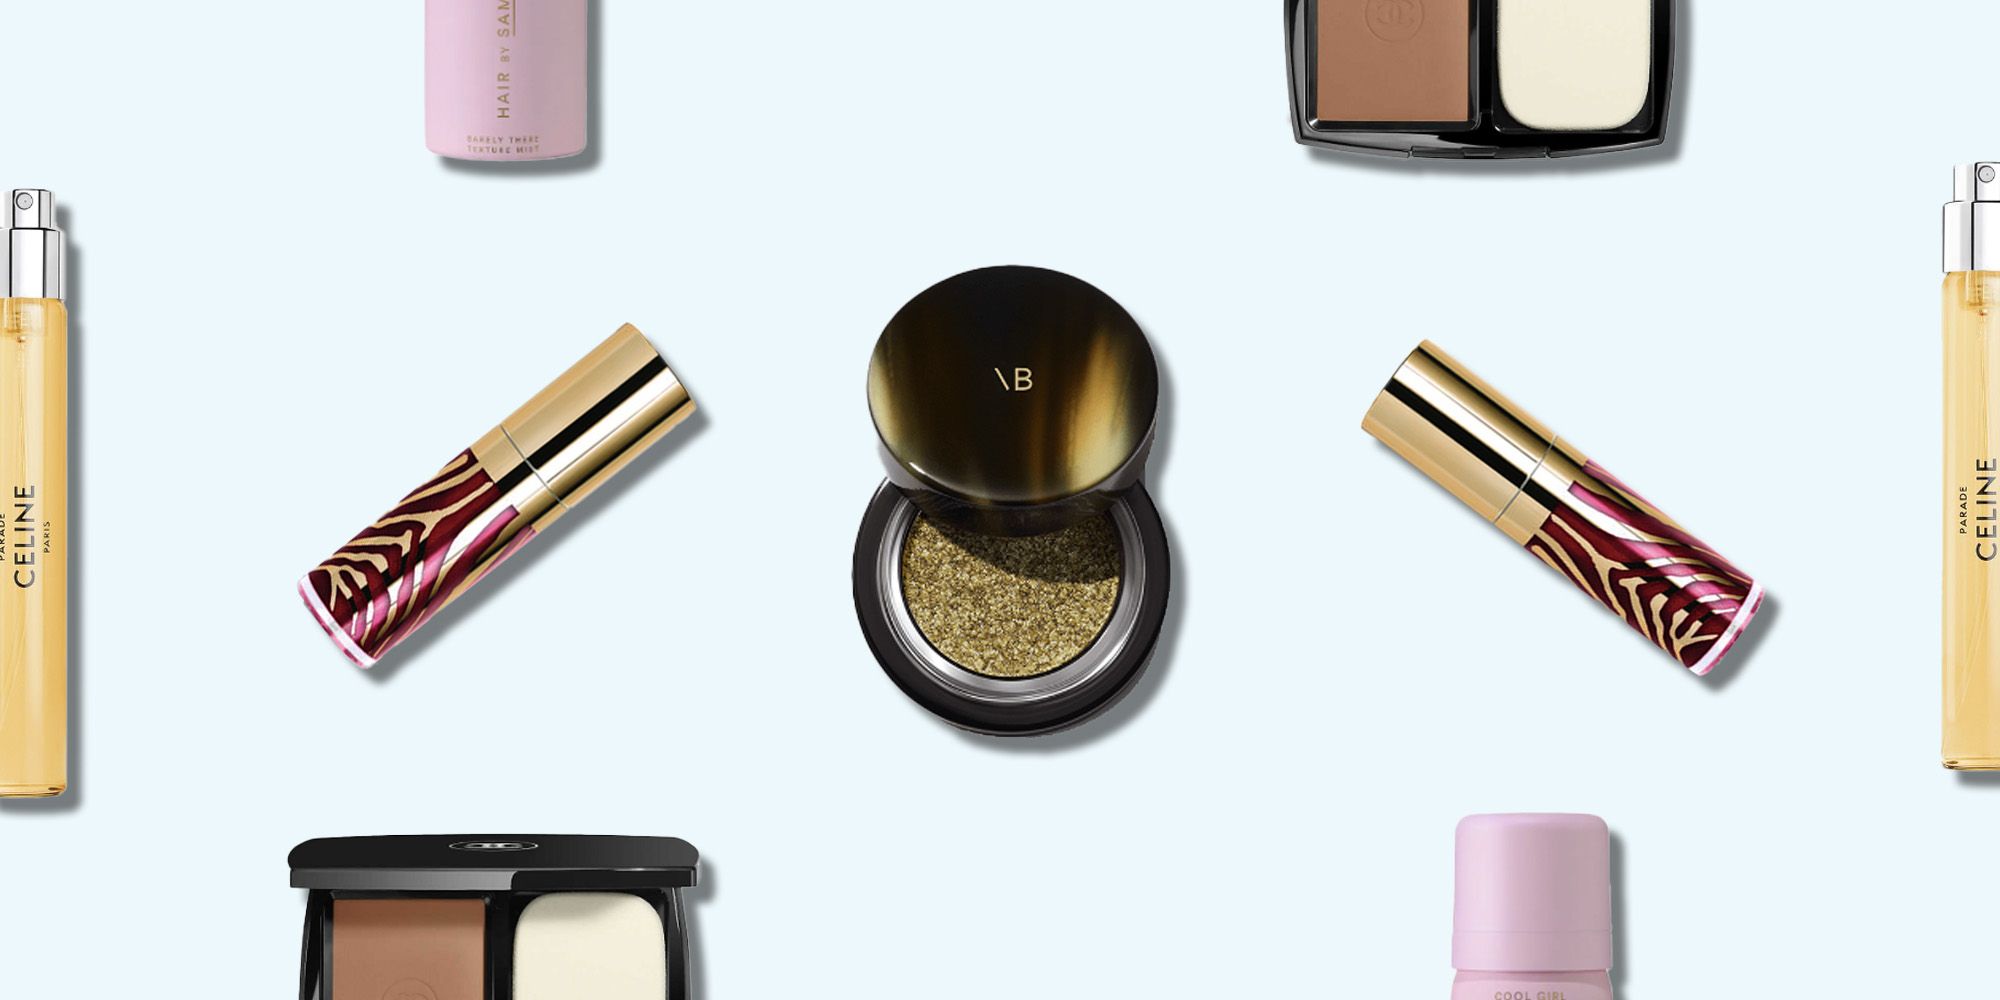 Unsung Makeup Heroes: Chanel Les Beiges Healthy Glow Sheer Powder